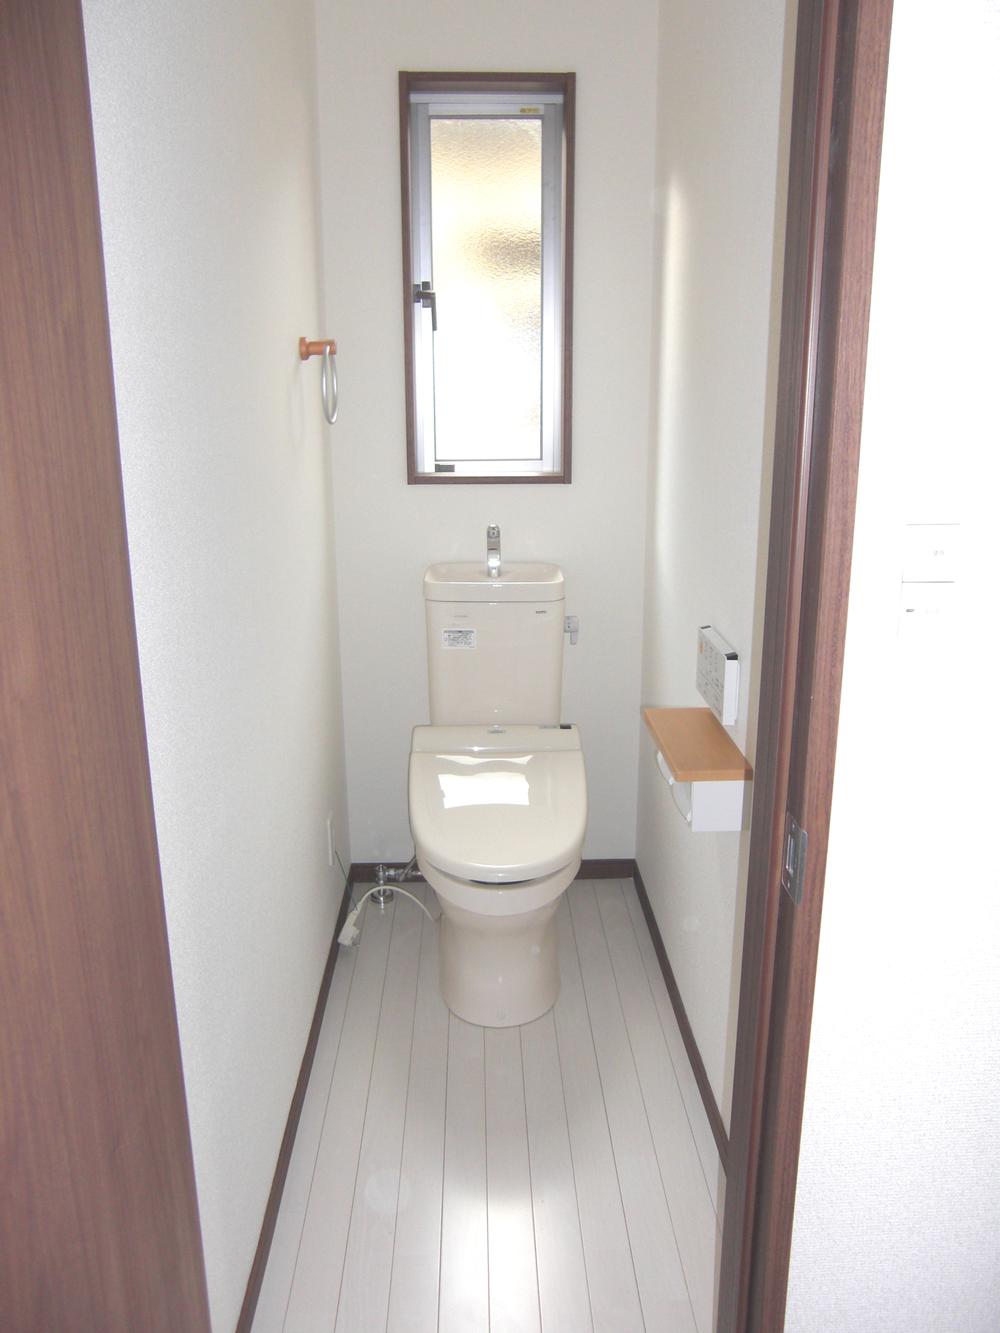 Toilet. (Photo = same specifications)